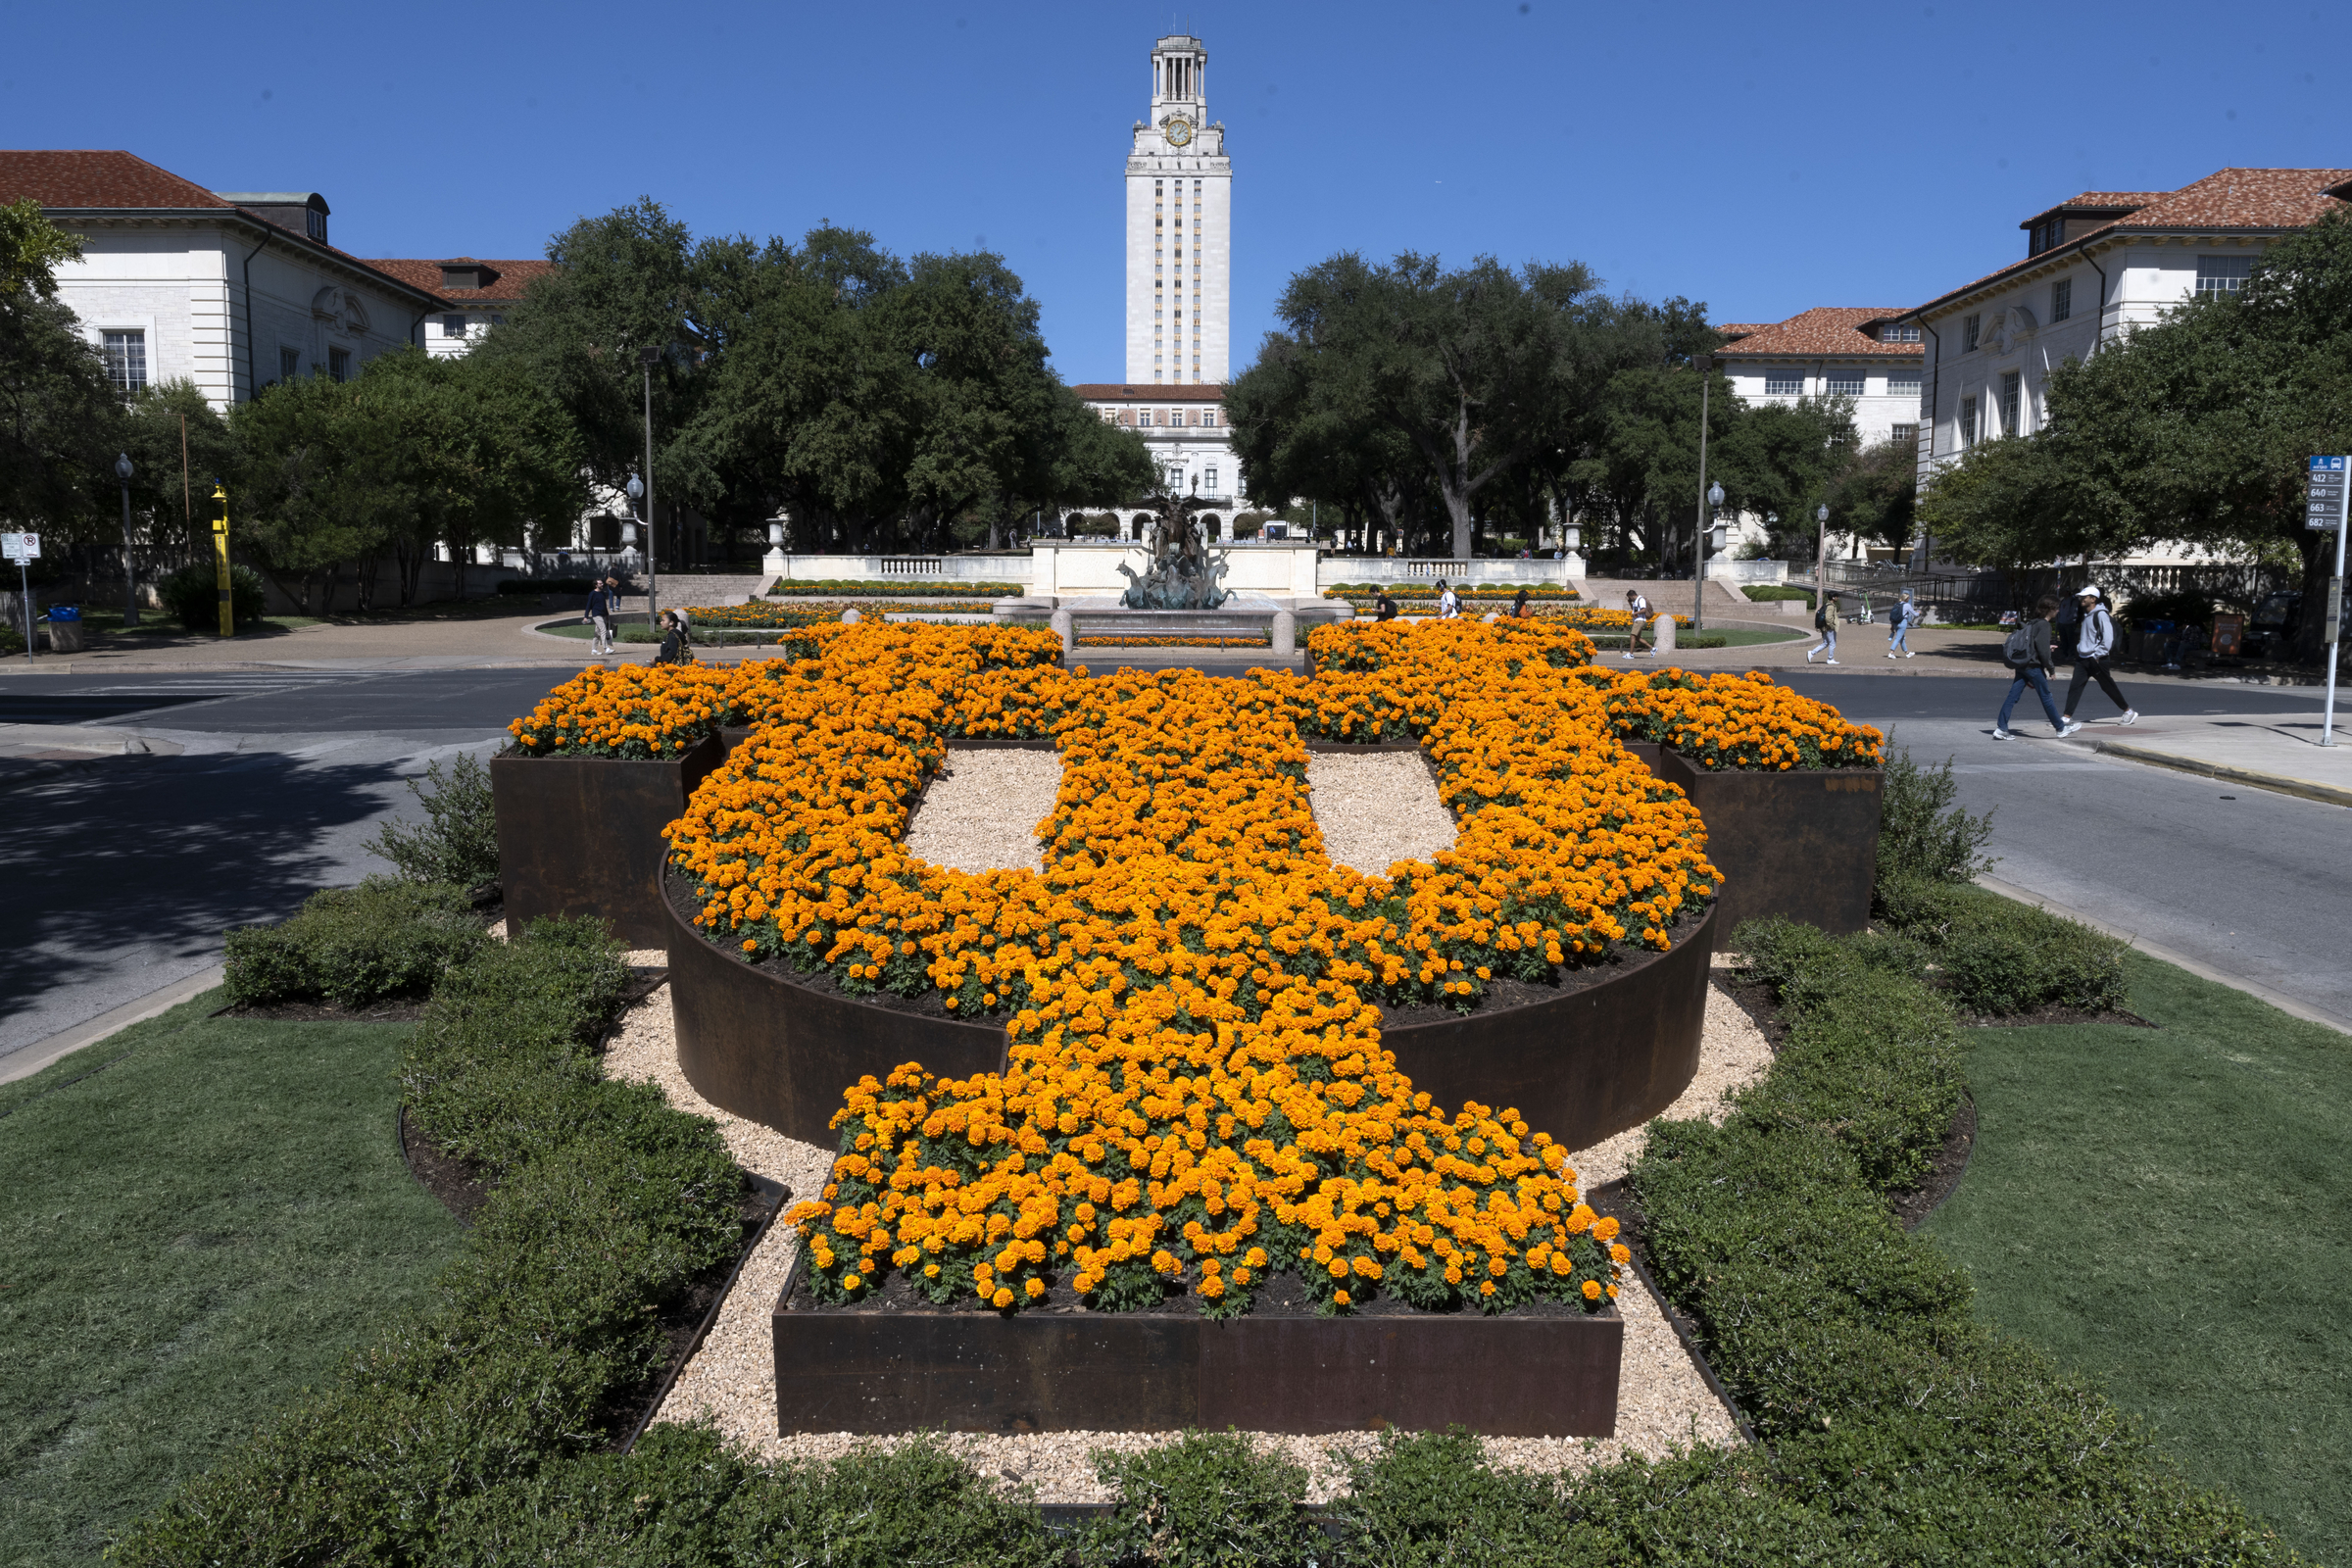 The UT Tower is in the background and in the foreground flowers spell U T in a garden